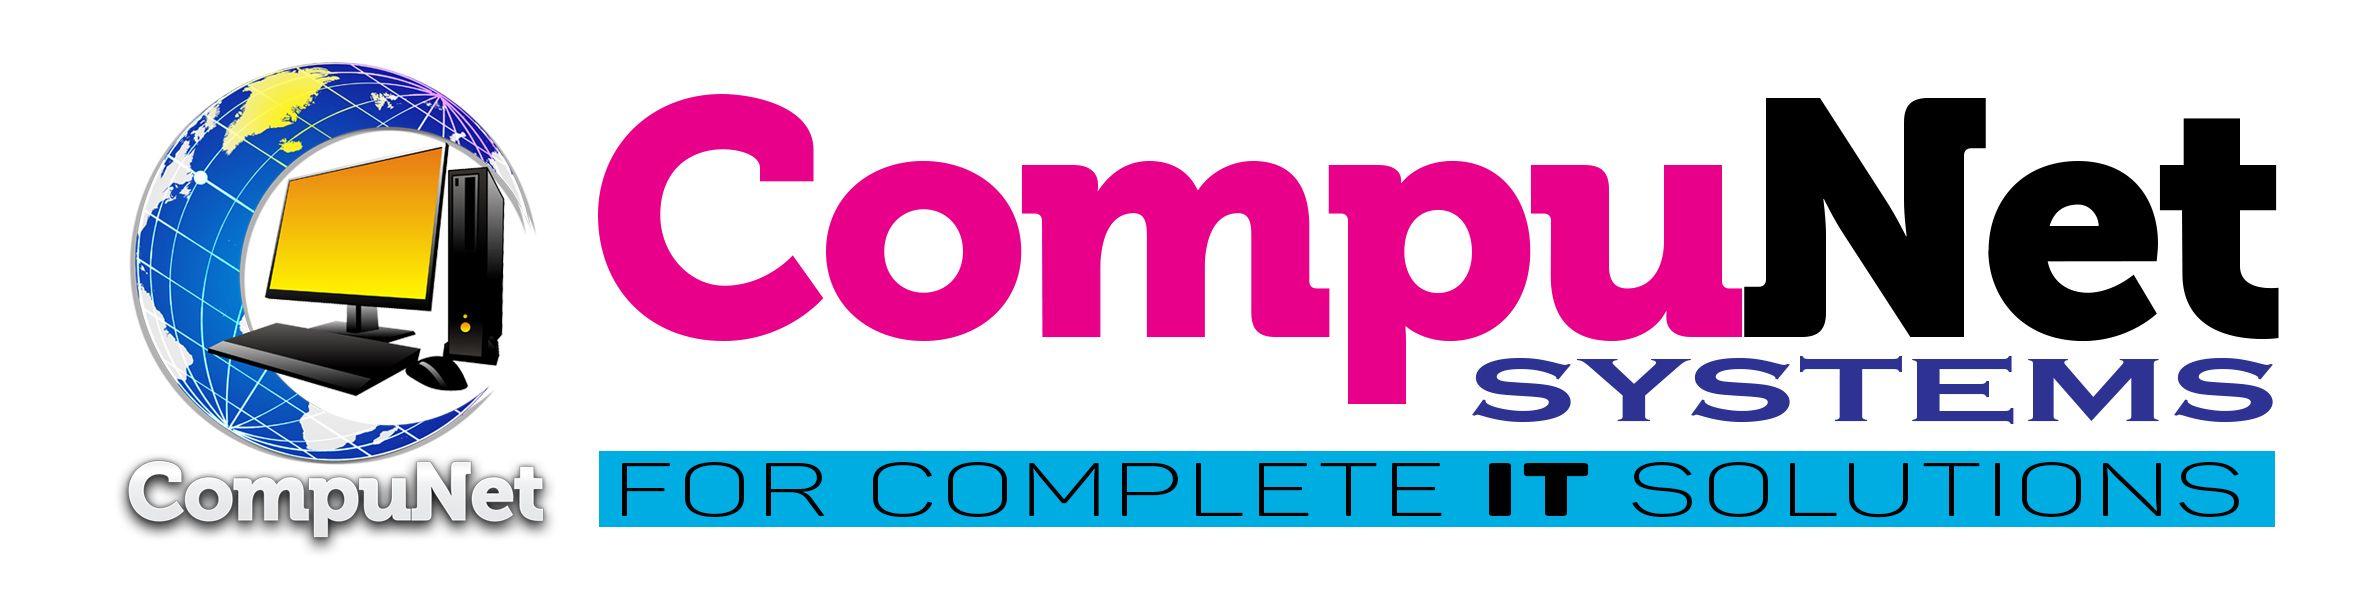 Compunet Logo - Search2day Business Classified